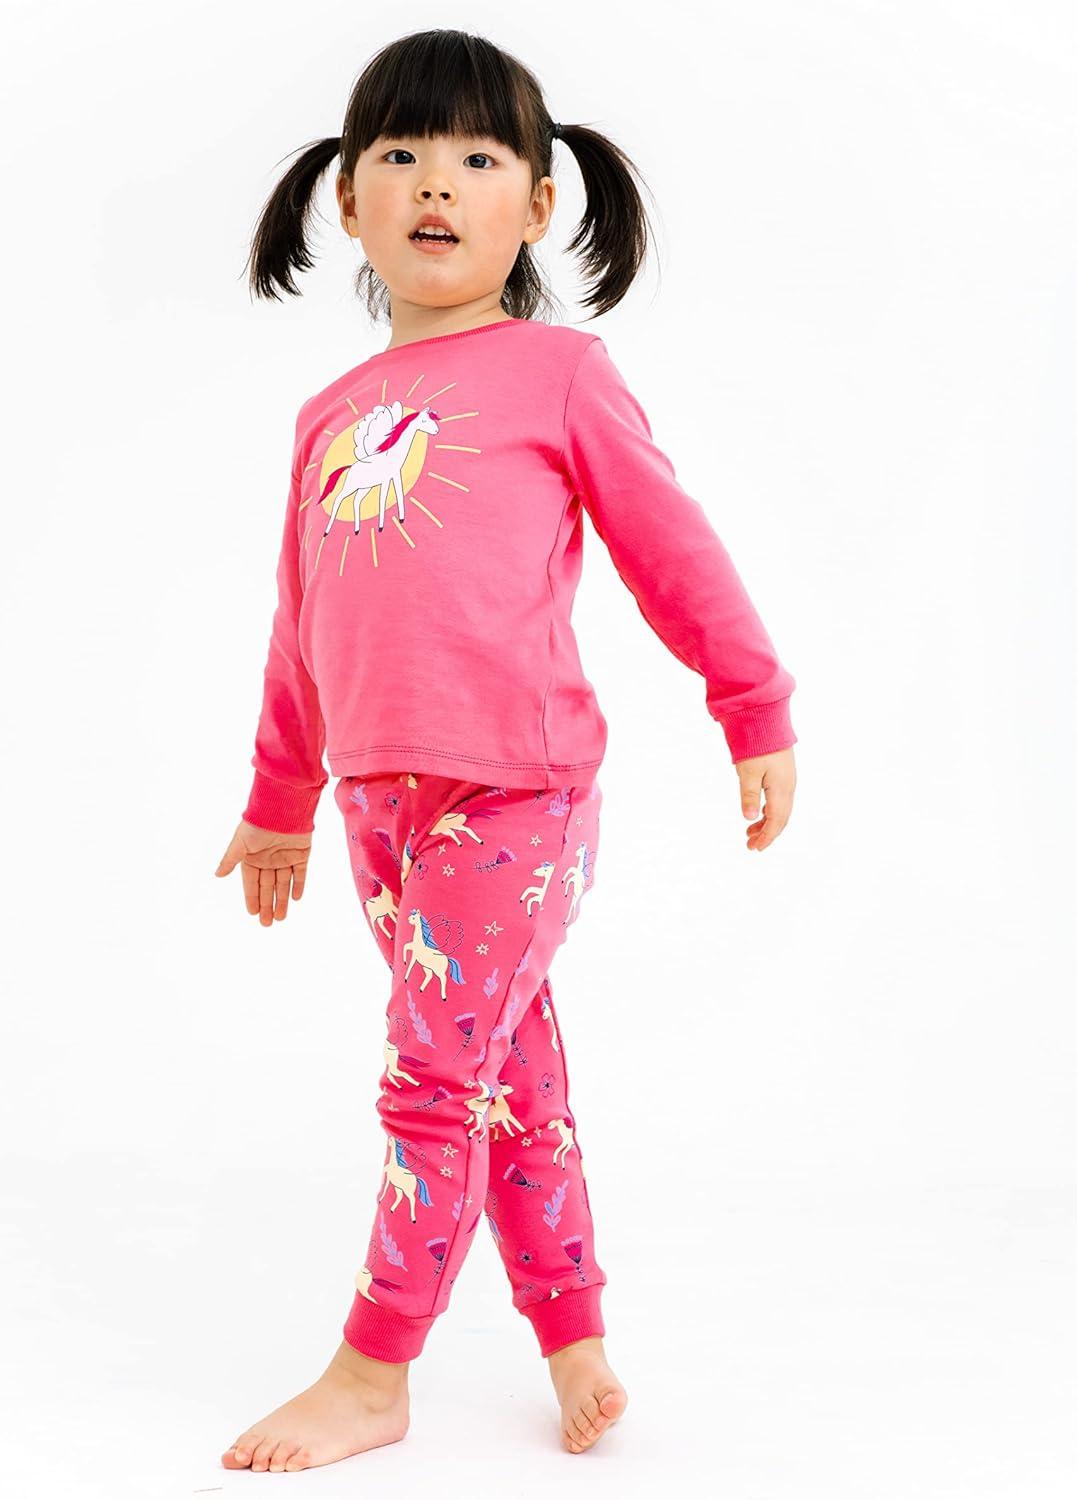 Comfortable kids' pink lounge pants, Best lounge wear for toddlers